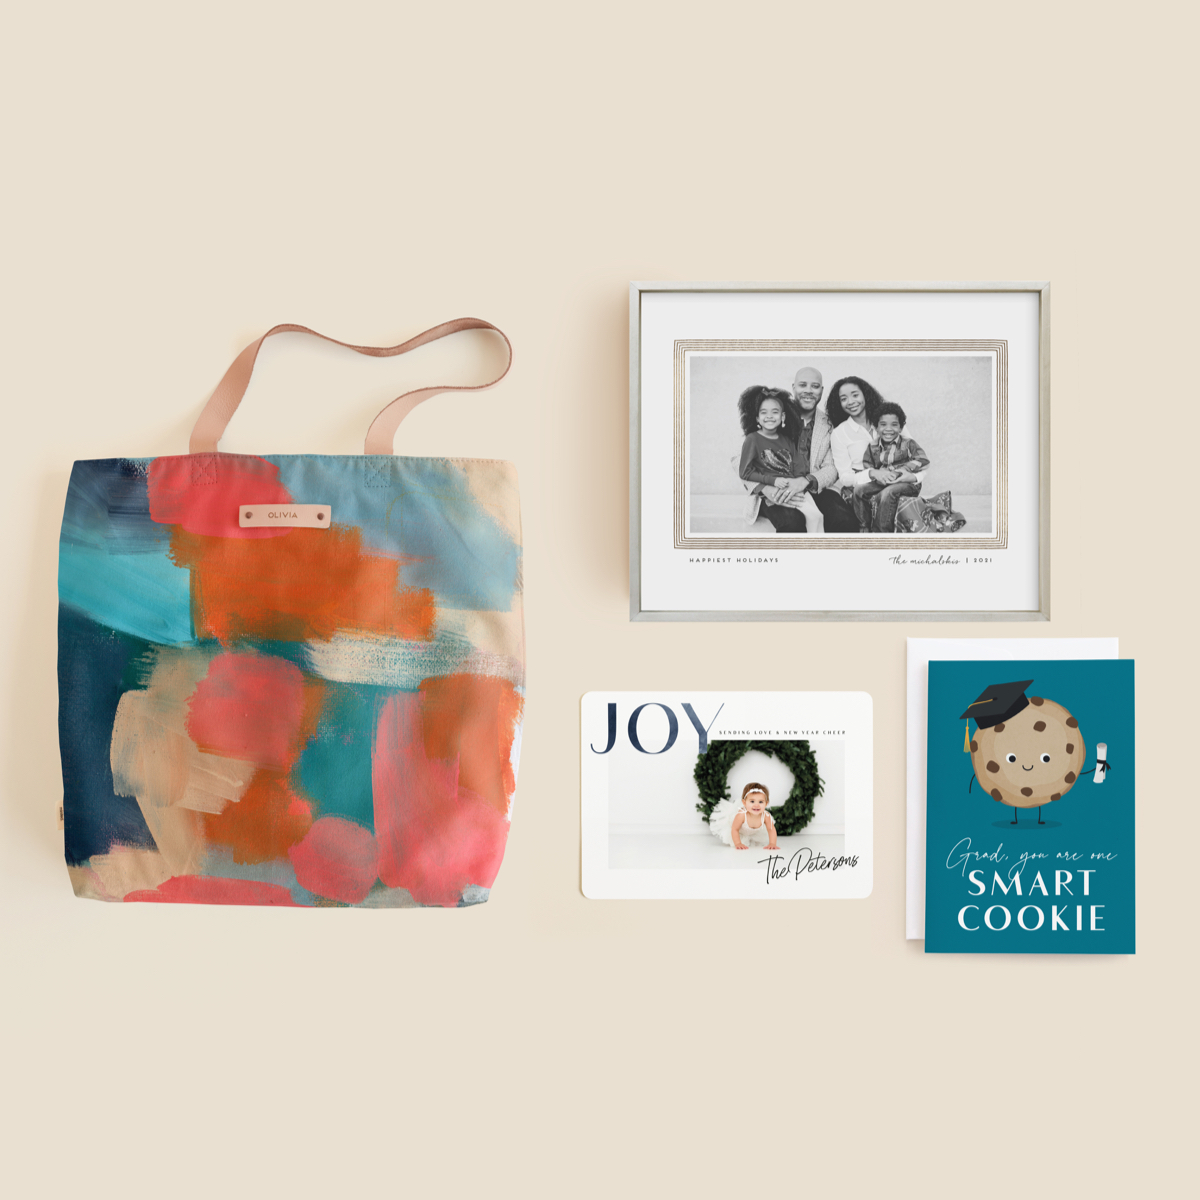 Enter the Minted giveaway for great appreciation gifts